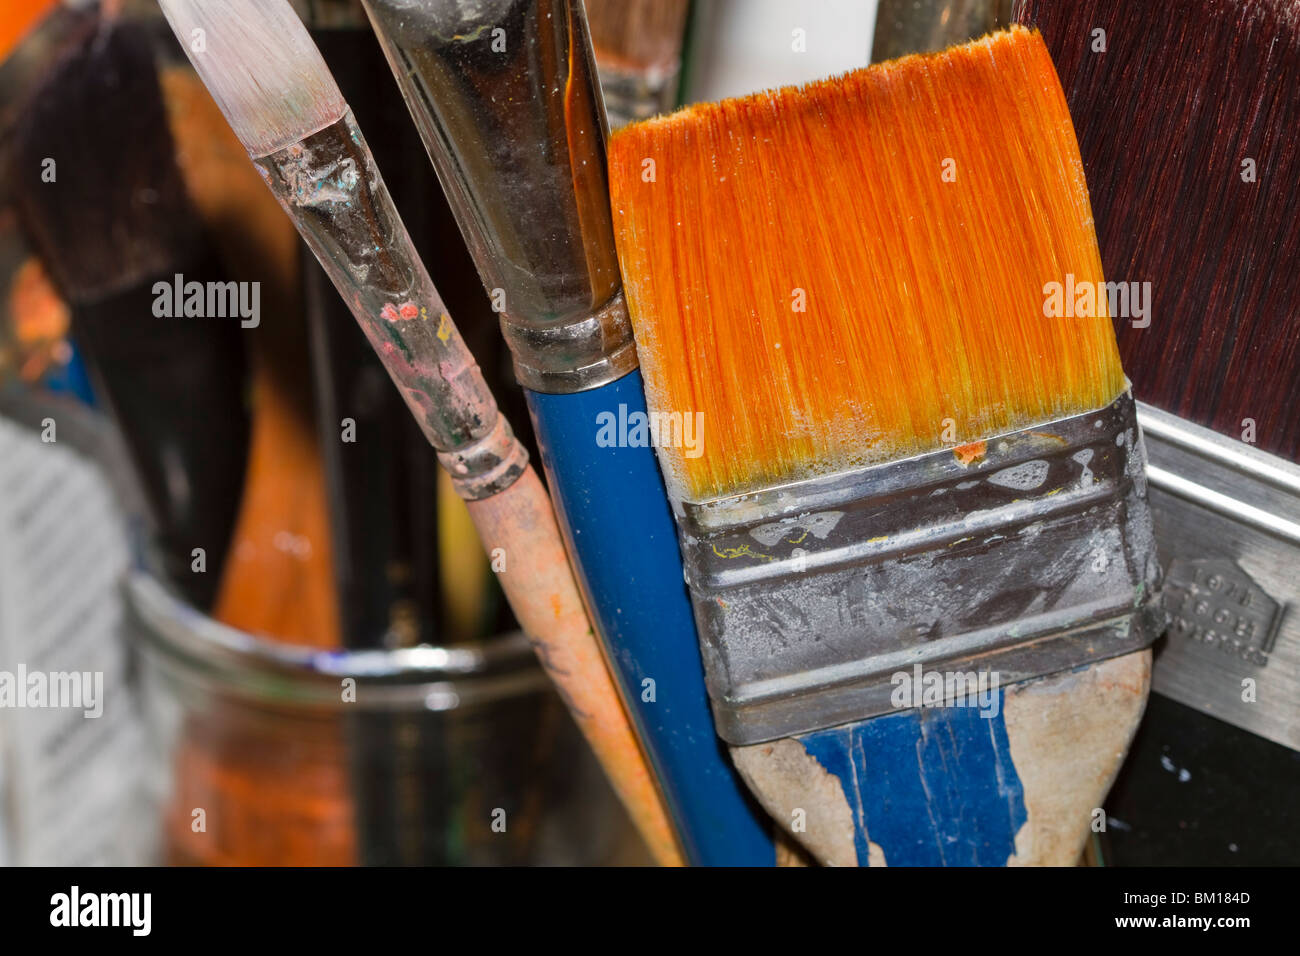 Artists paintbrush. Paintbrushes in various sizes in an artists studio Stock Photo